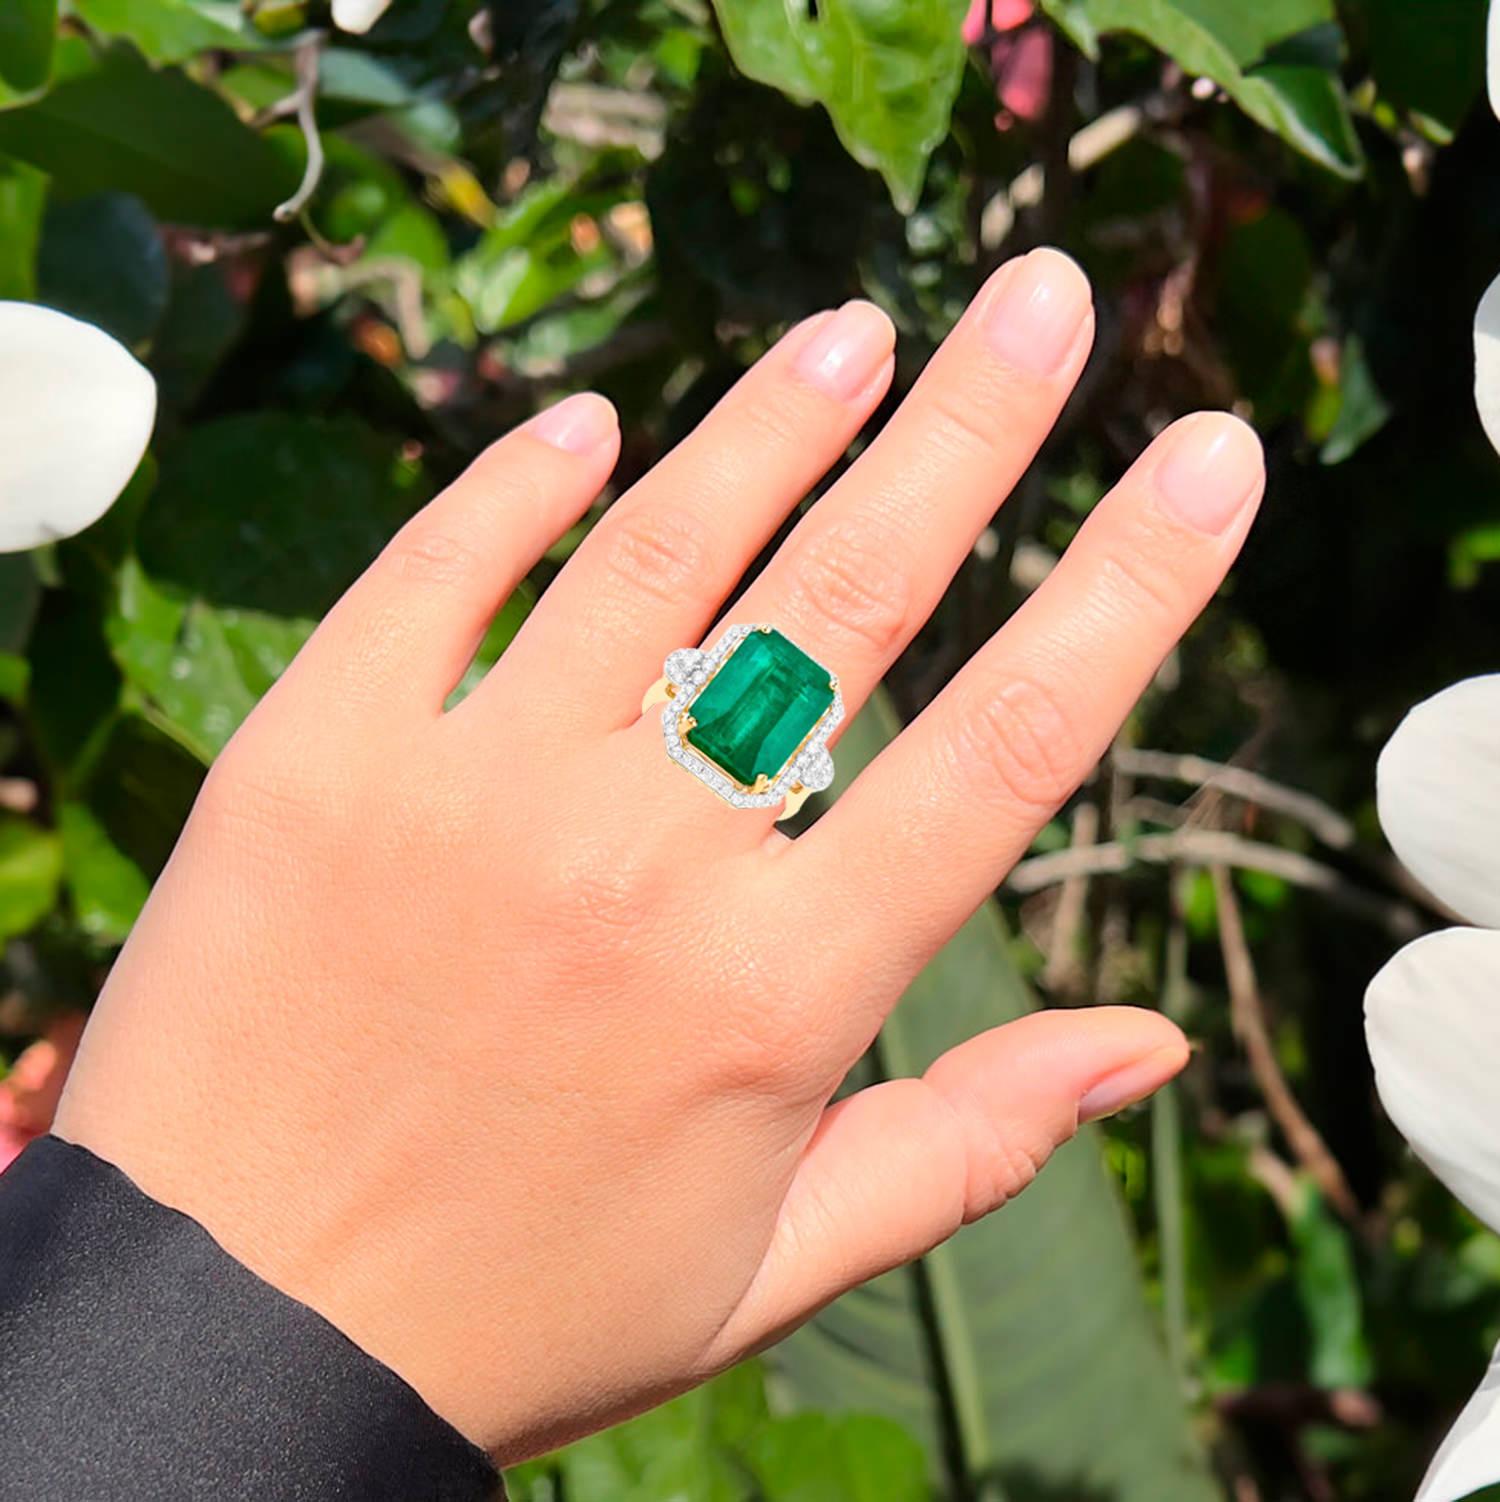 IGI Certified Zambian Emerald Ring Diamond Setting 12 Carats 14K Yellow Gold In Excellent Condition For Sale In Laguna Niguel, CA